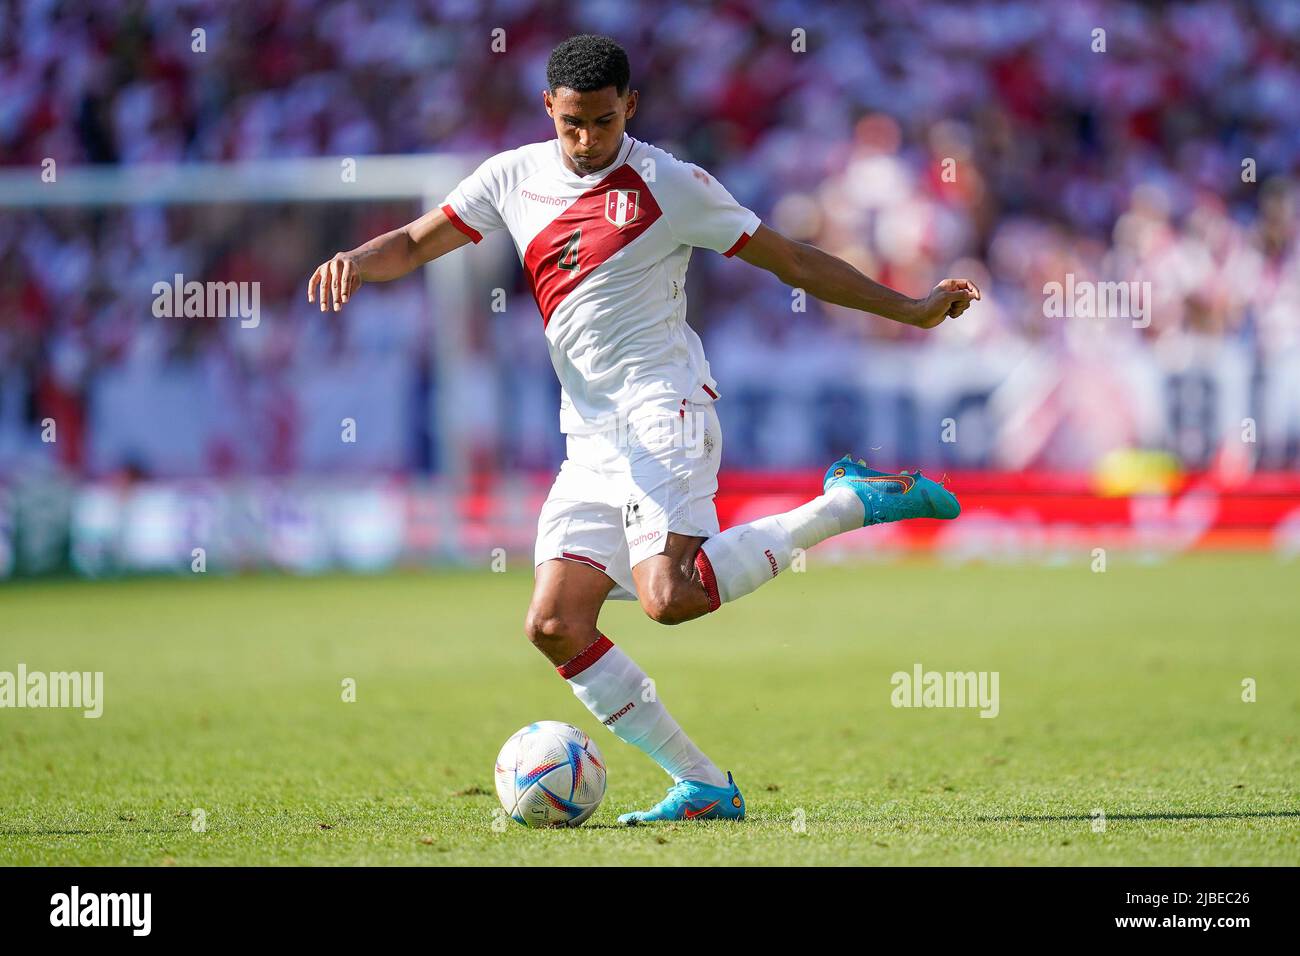 Barcelona, Spain. June 5, 2022, Marcos Lopez of Peru during the friendly match between Peru and New Zealand played at RCDE Stadium on June 5, 2022 in Barcelona, Spain. (Photo by Bagu Blanco / PRESSINPHOTO) Stock Photo